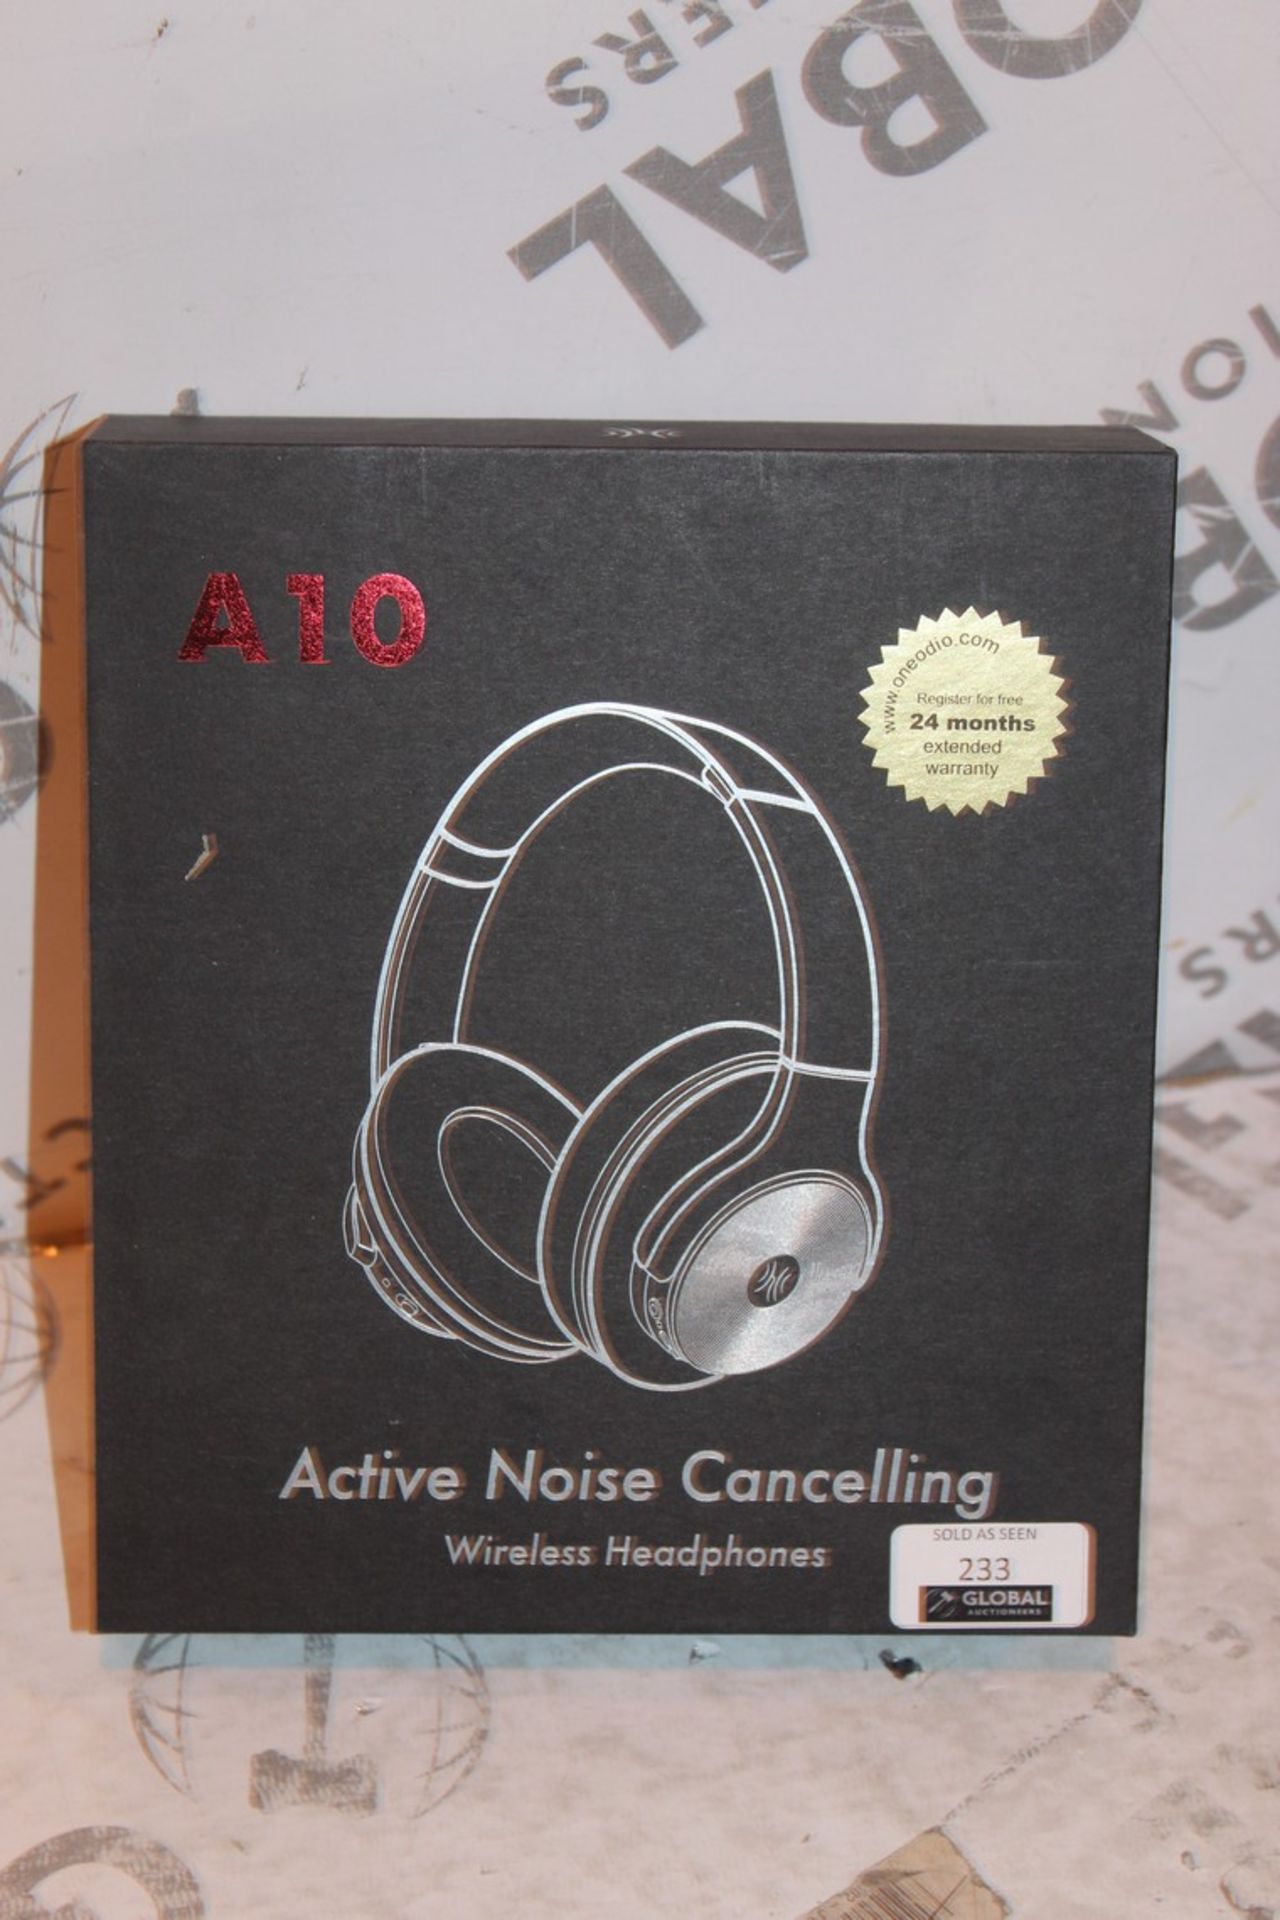 Boxed Pair A10 Active Noise Cancelling Wireless He